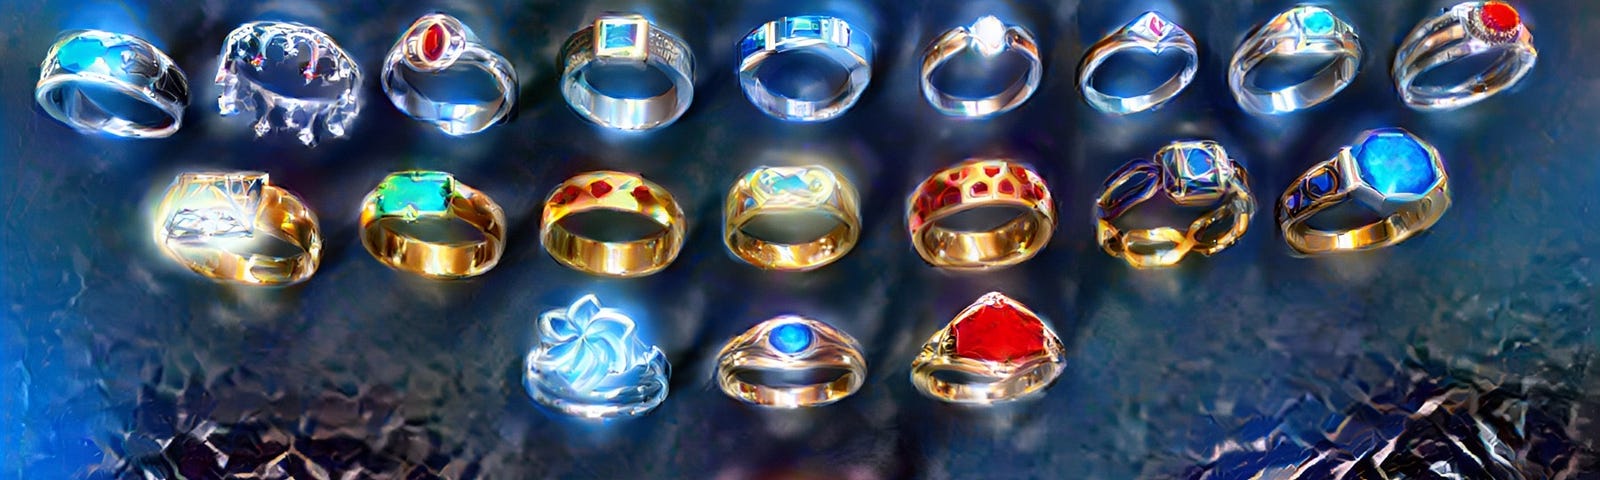 All 20 Rings of Power in an AI rendered image. From top to bottom: The 9 rings of mortal men, the 7 rings of the Dwarves, the 3 rings of the Elves and finally Dark Lord Sauron’s Master Ring of Power.